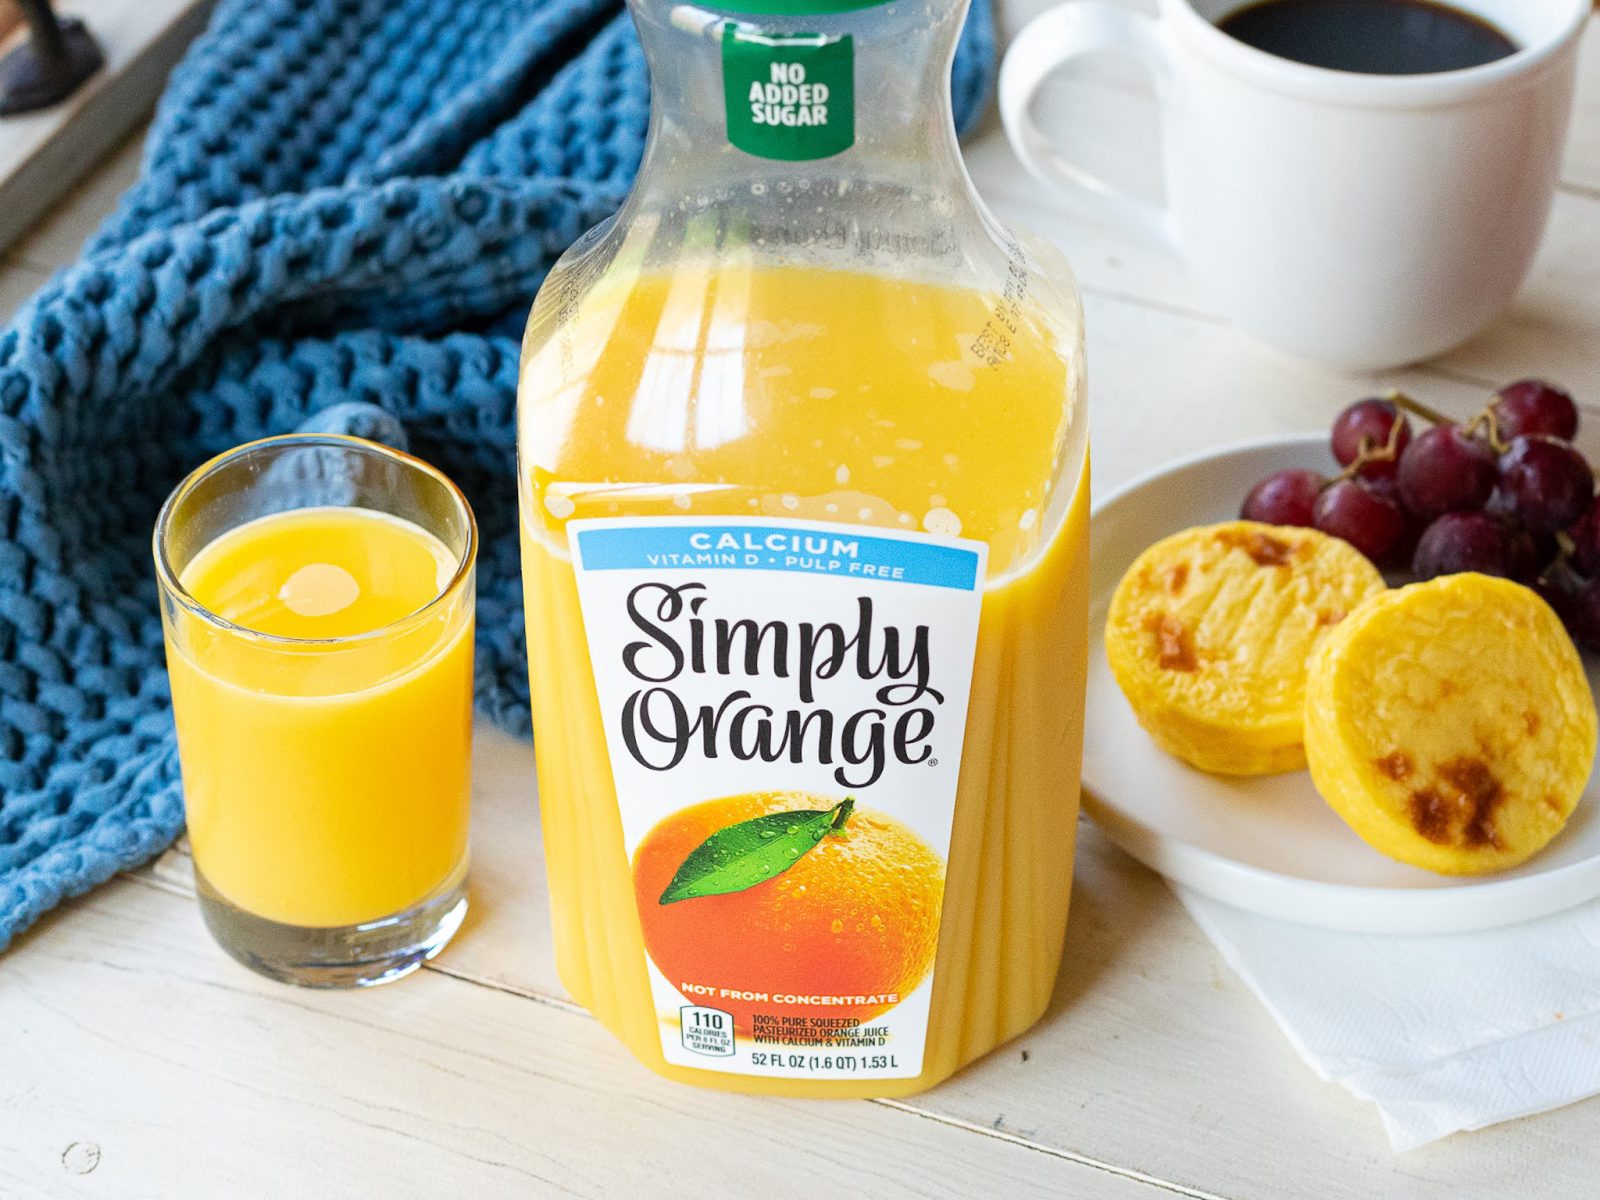 Simply Orange Juice Ibotta For The Kroger Sale – As Low As $2.29 (Deal Ends Soon!)